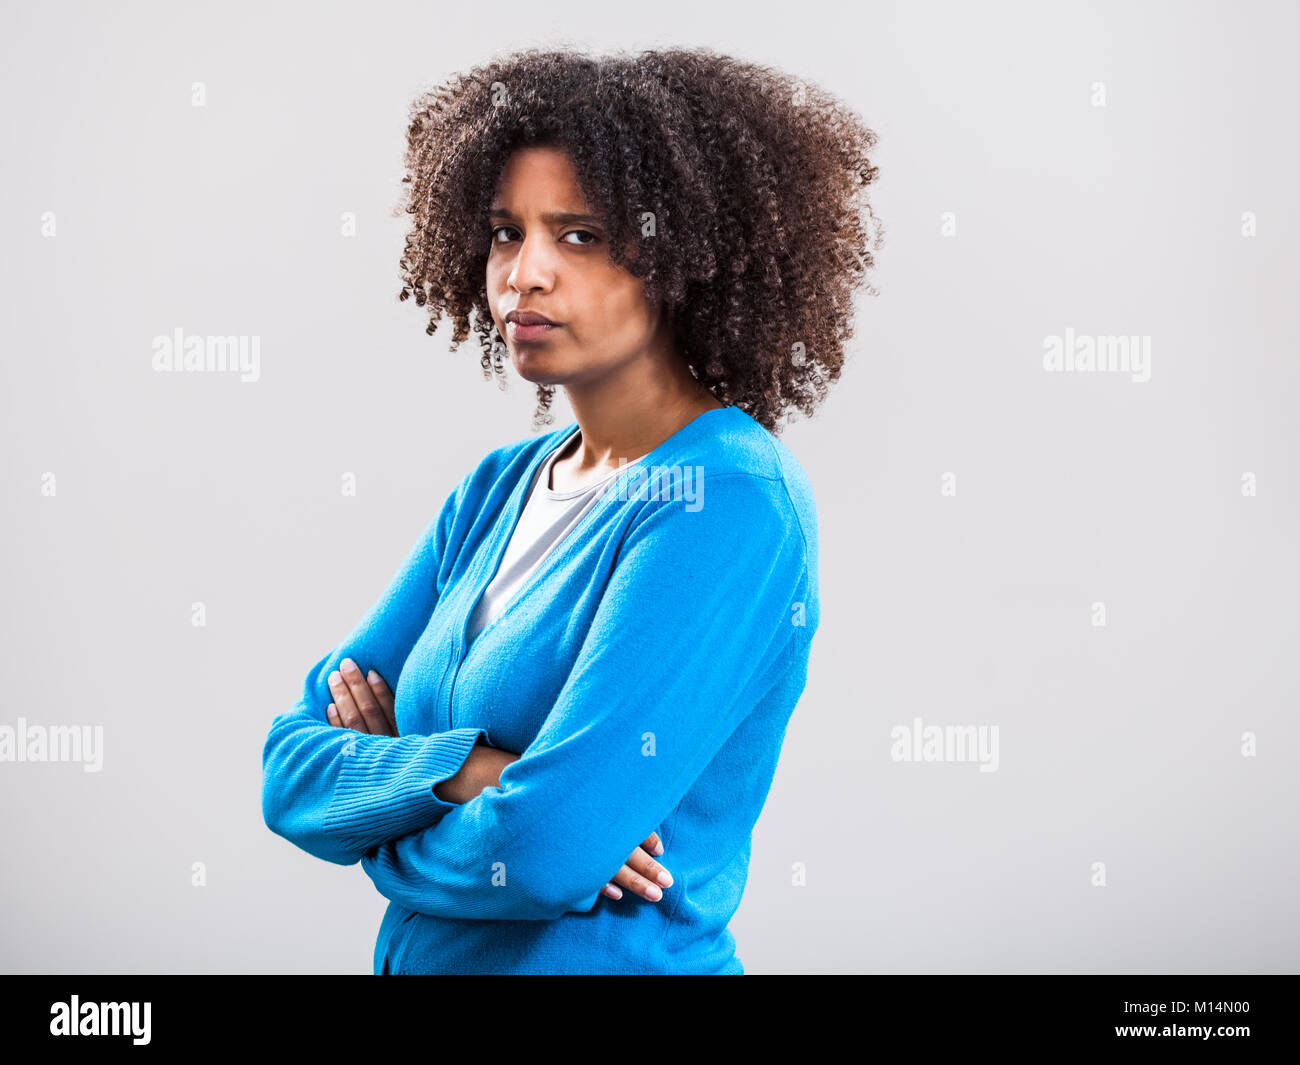 Portrait of offended woman Stock Photo